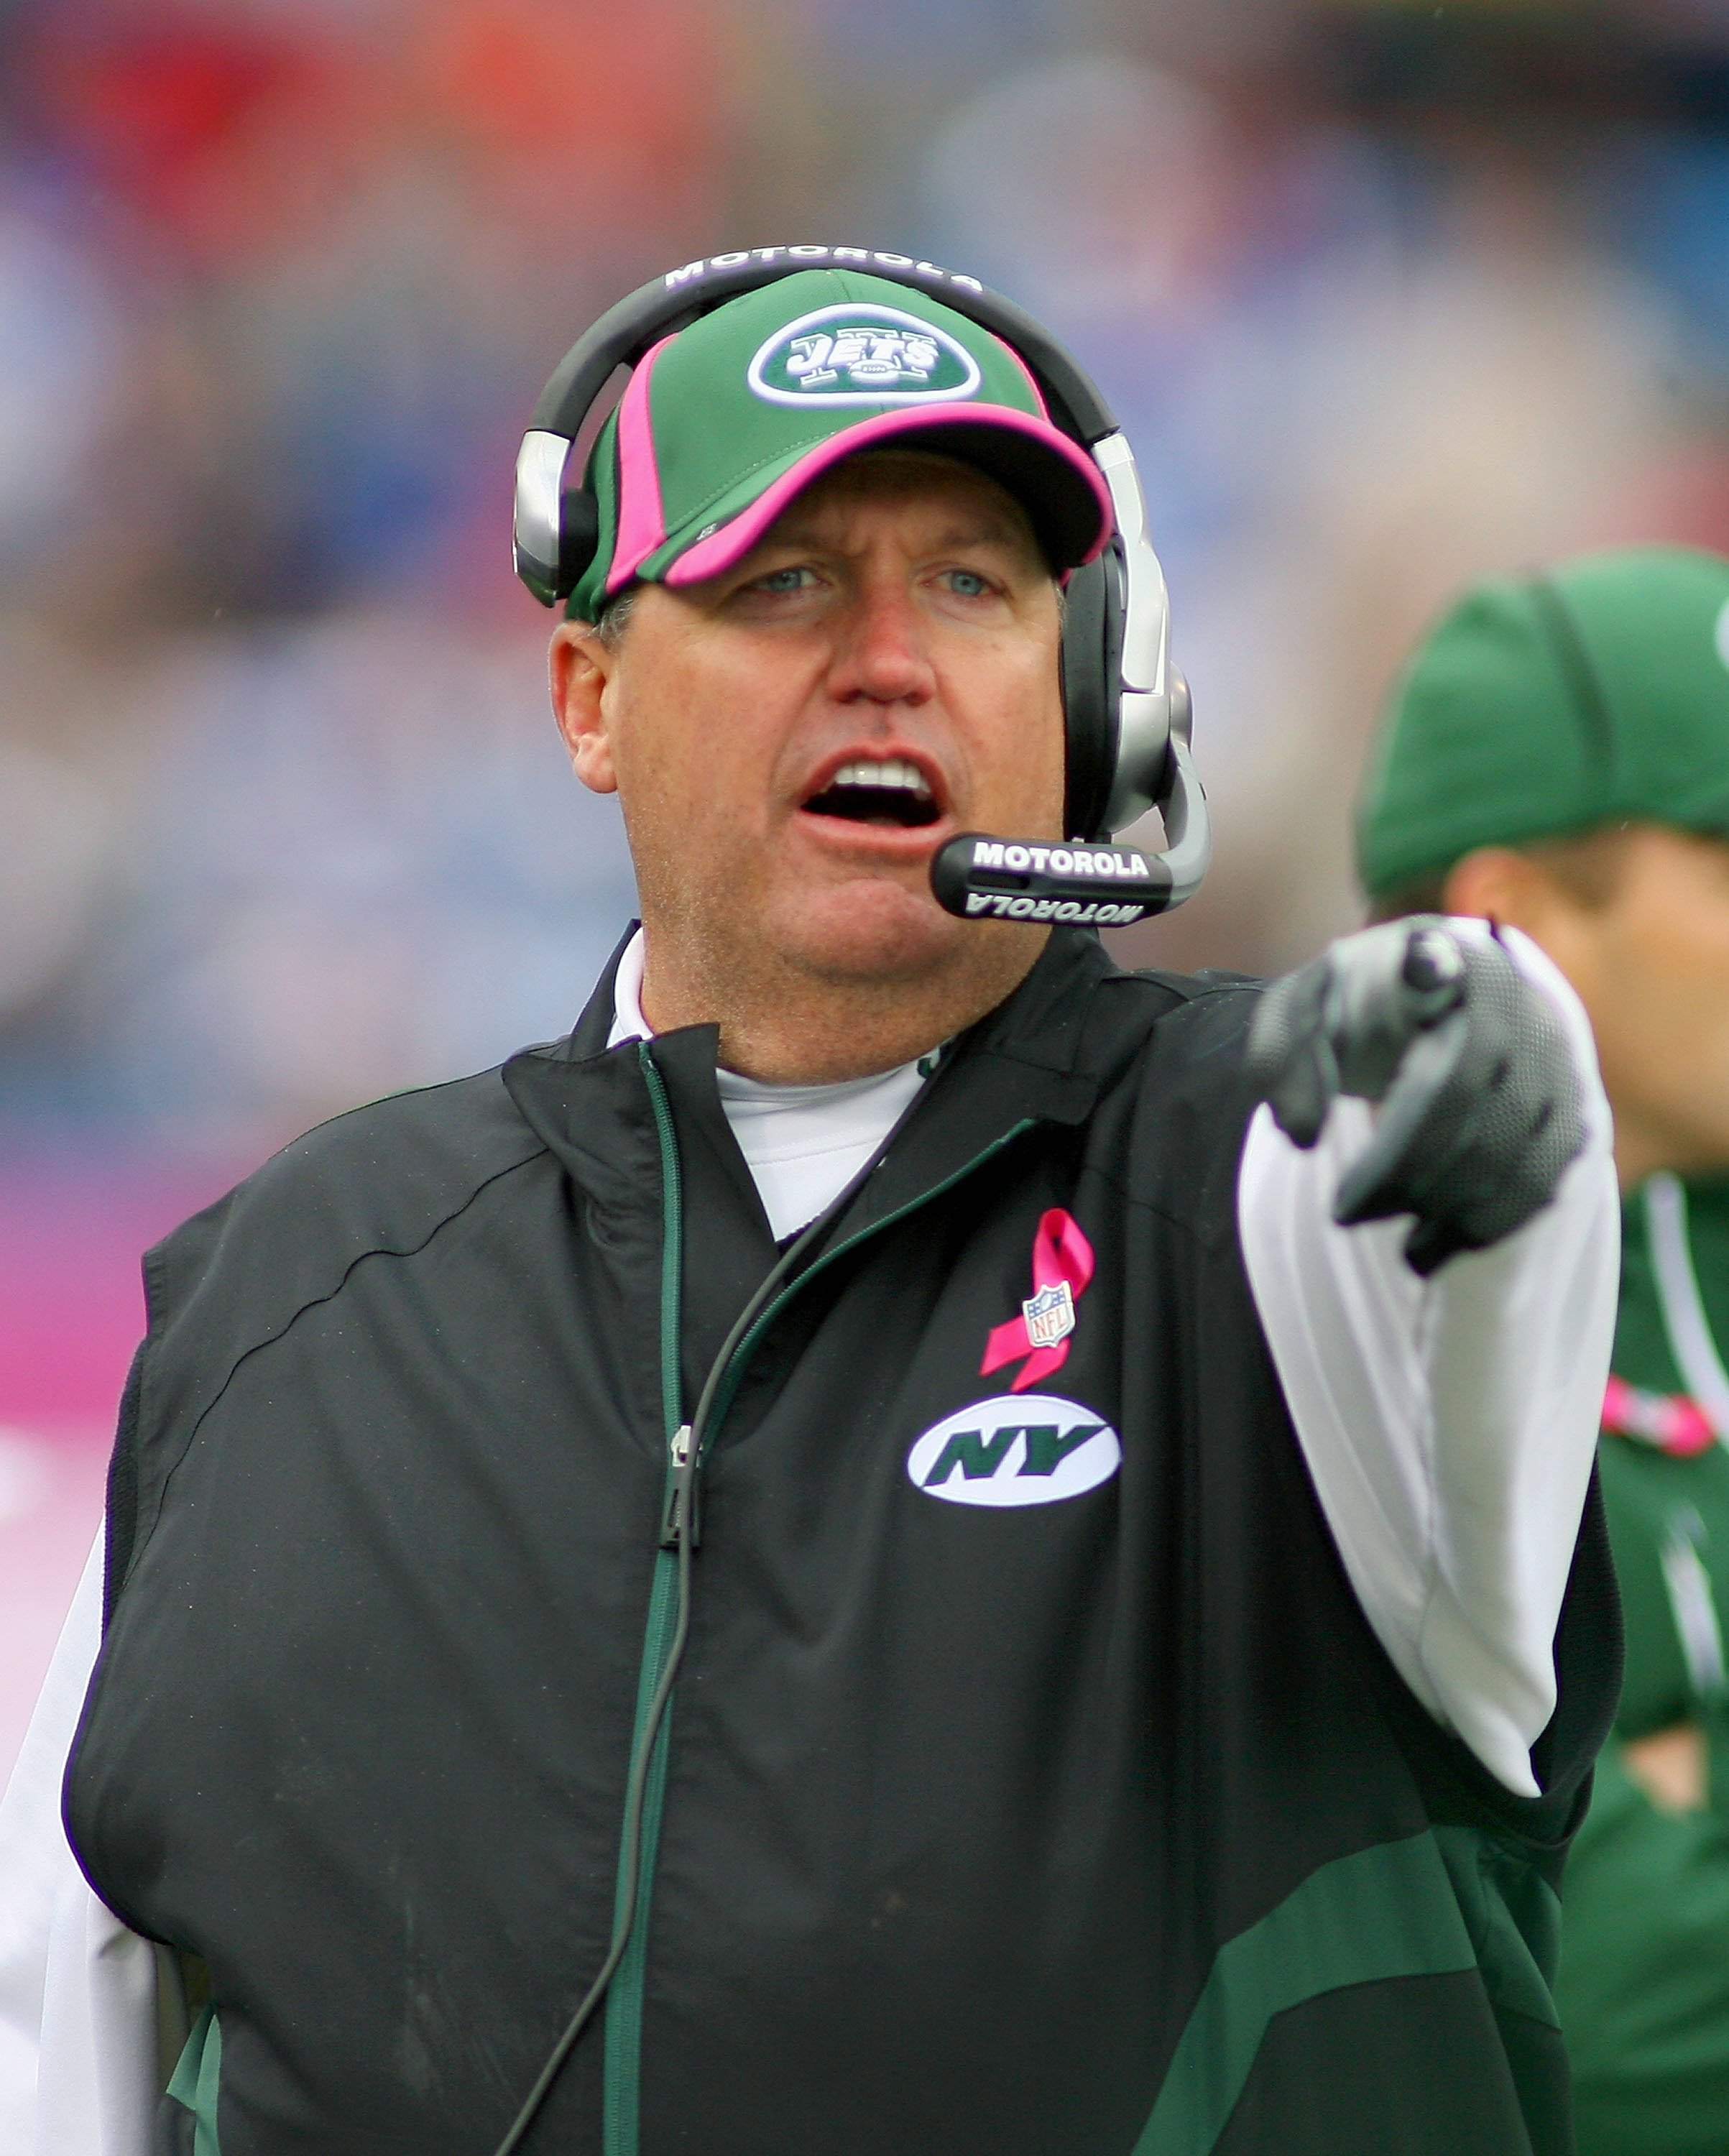 ORCHARD PARK, NY - OCTOBER 03: Rex Ryan, head coach  of the New York Jets points on the sidelines against the Buffalo Bills at Ralph Wilson Stadium on October 3, 2010 in Orchard Park, New York. The Jets won 38-14. (Photo by Rick Stewart/Getty Images)